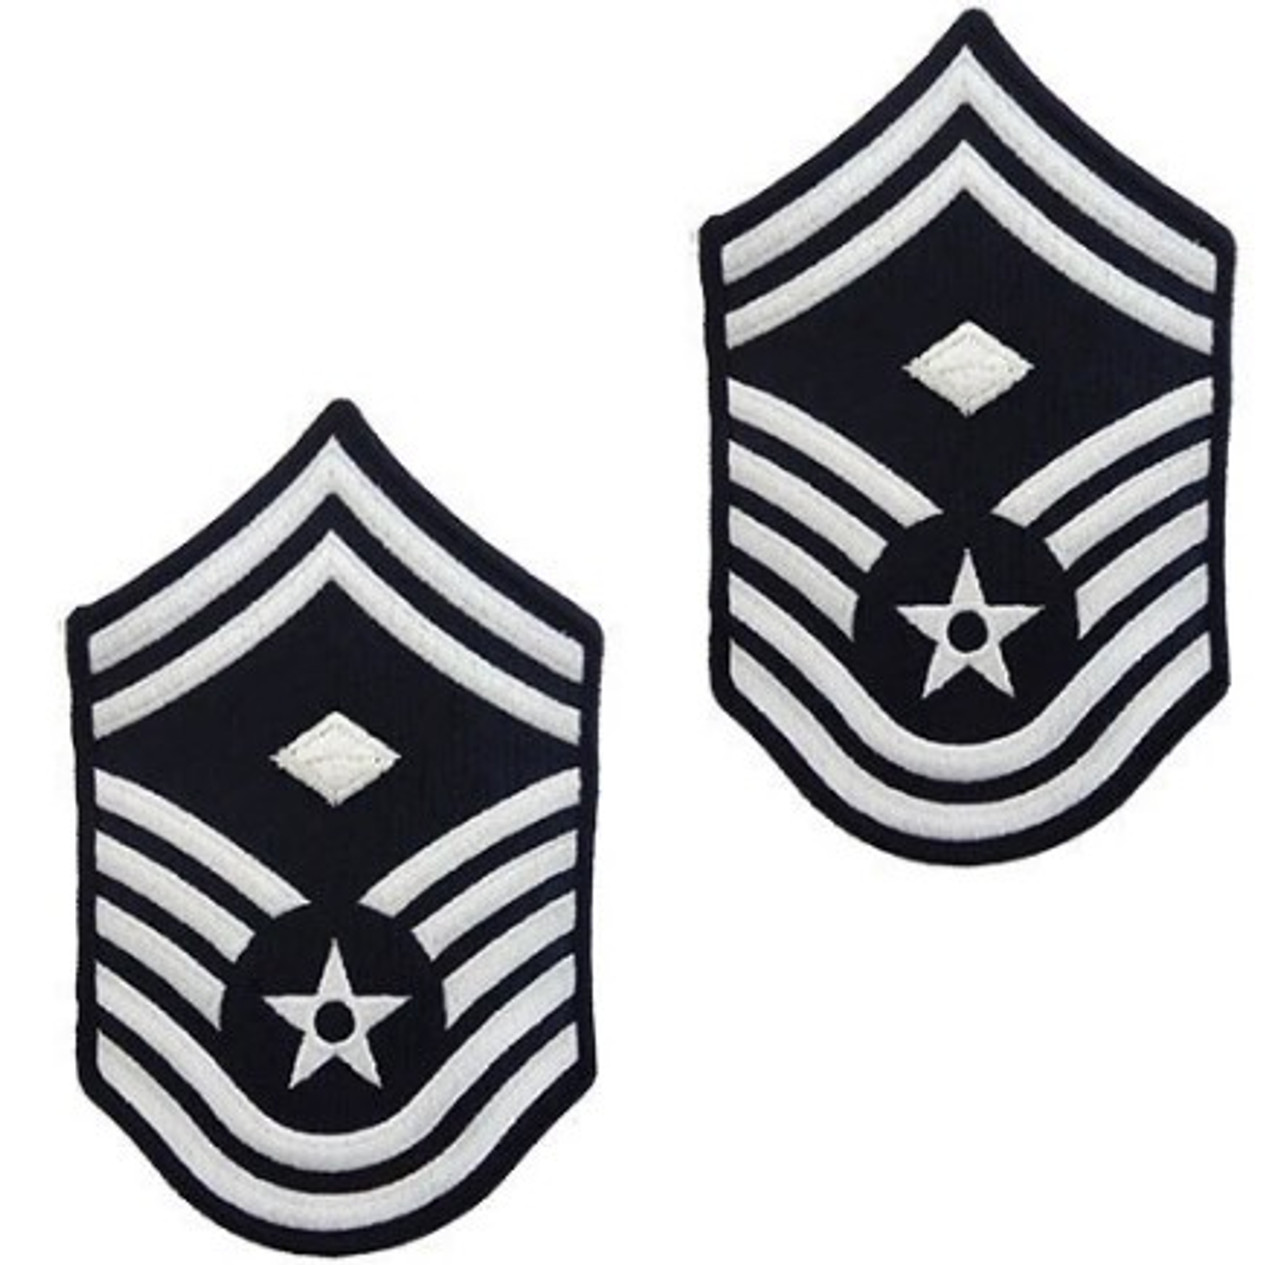 - Chief Master Chevron: Sergeant Command Air Force color